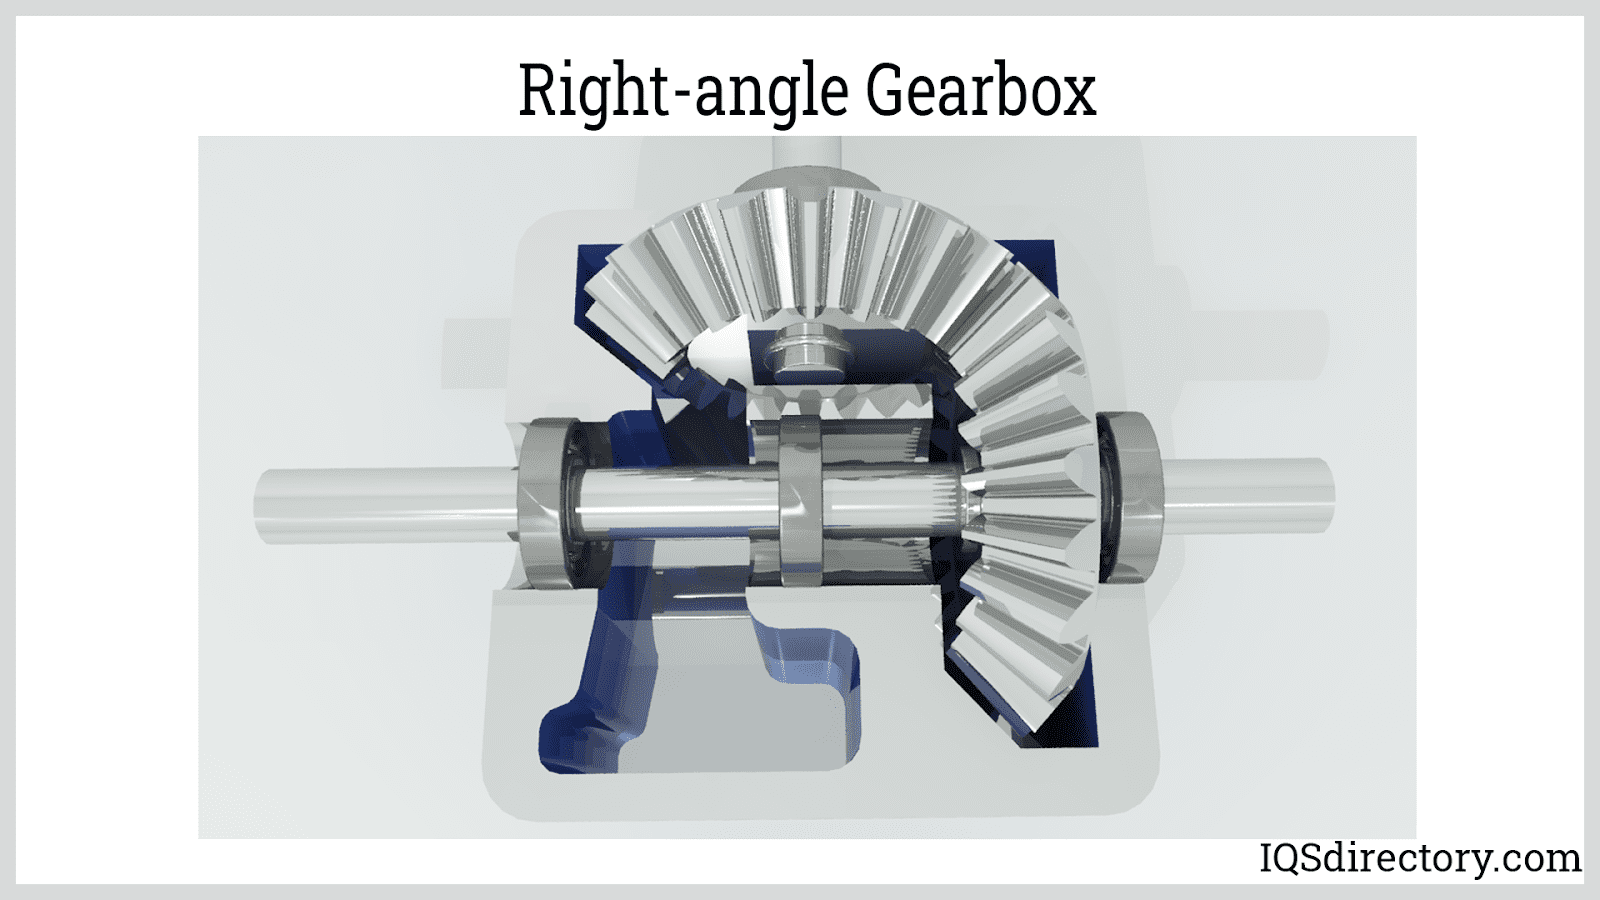 Right-angle Gearbox